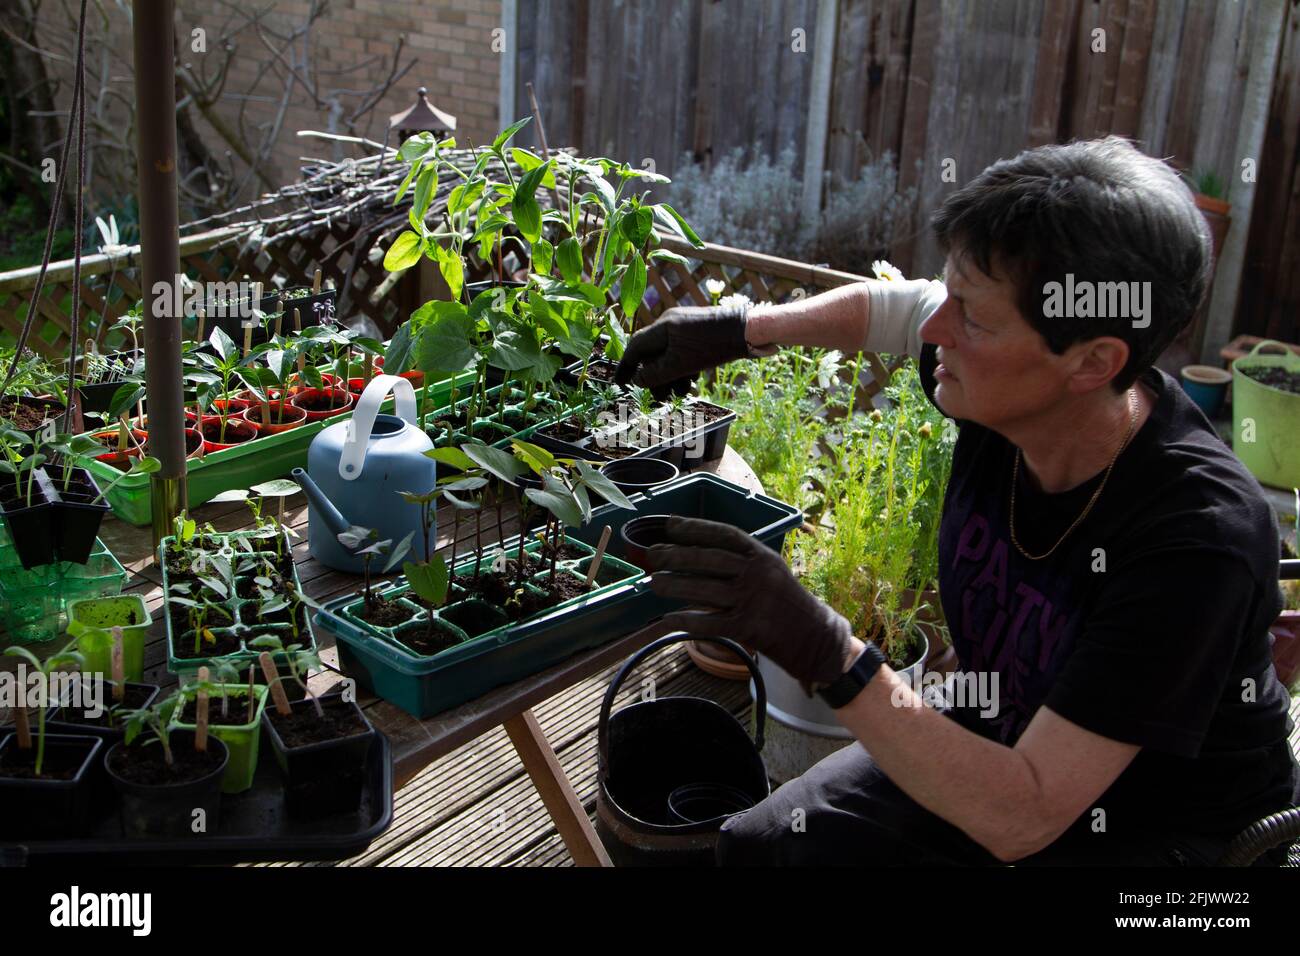 Potting on plants grown from seed Stock Photo